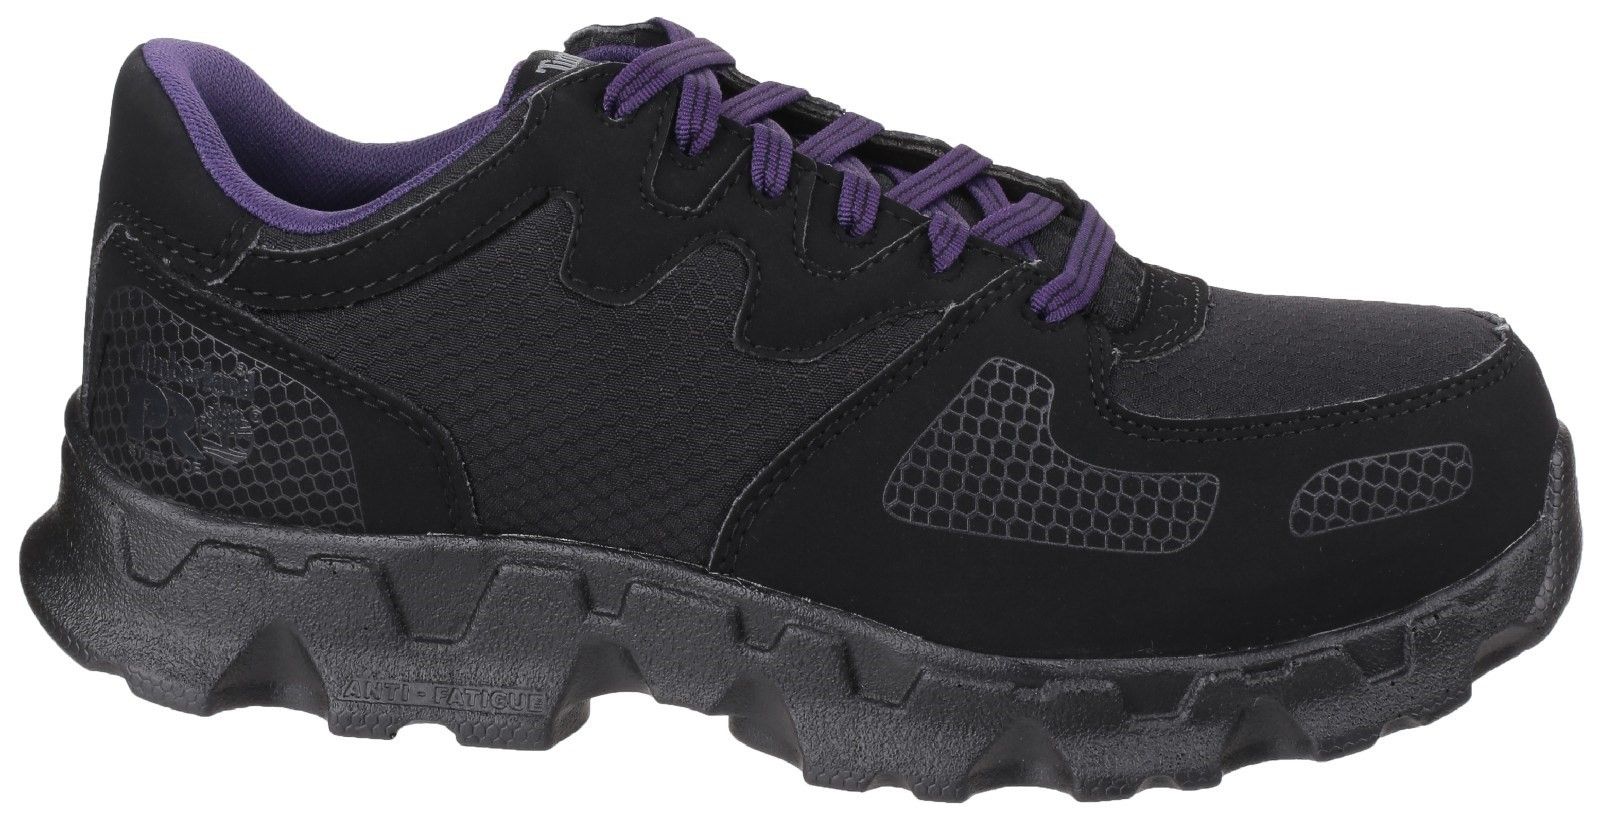 FOR MARATHON WORK DAYS: Built for lightweight performance, Timberland PRO Powertrain athletic work shoes feature abrasion-resistant uppers and slip-resistant Anti-Fatigue technology insoles, giving them the performance and durability you need.Timberland PRO Powertrain Low Hiker with impact and compression resistant toe cap. 
Anti-static with an energy absorbing heel. 
Penetration resistance 1100 Newtons. 
Cement construction for flexibility and reduced break-in time. 
Proprietary outsole with built-in Anti-Fatigue Technology.